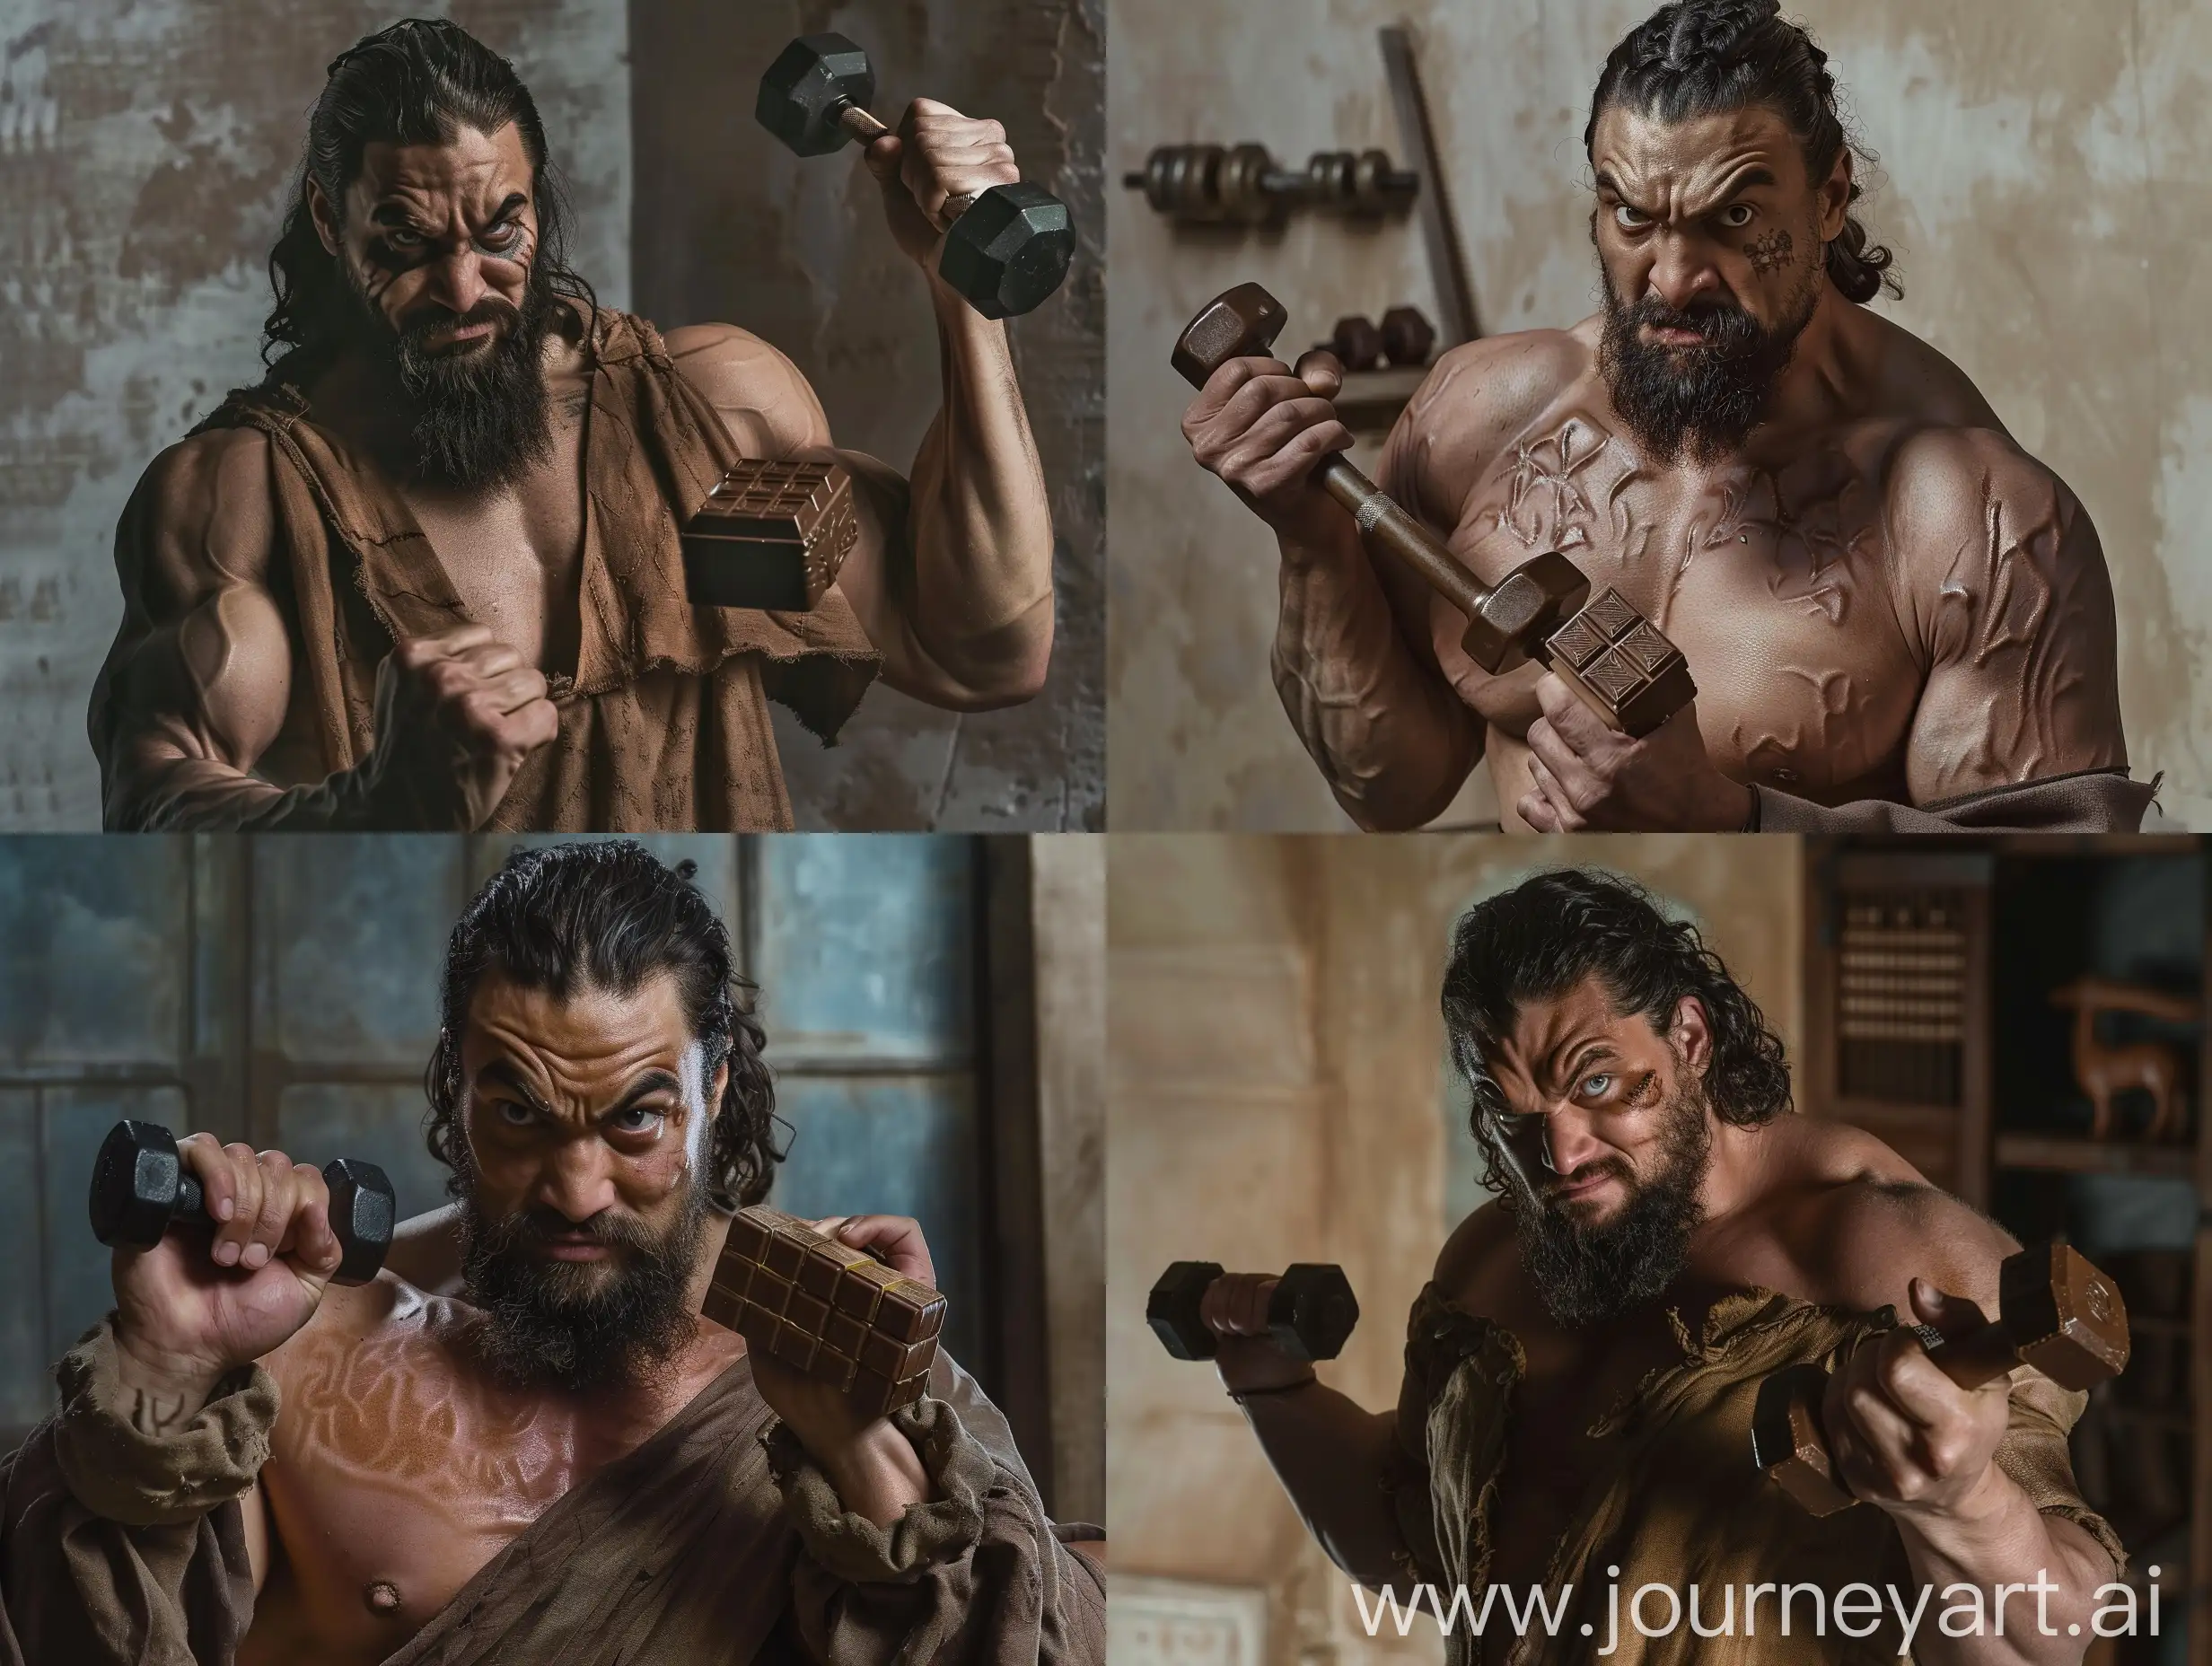 Khal Drogo (played by Jason Momoa) in Game of Thrones series, Khal Drogo's face and body is very fat, he is very overweight, he has a very fat body, Khal Drogo is wearing an old brown tunic Khal Drogo in the club Winterfell is exercising. Khal Drogo holds a dumbbell in his right hand, holds a bar of chocolate in his left hand, Khal Drogo looks at the camera with a mischievous smile, the style of The Witcher, the lighting is classic, realistic, clear, full body, q2